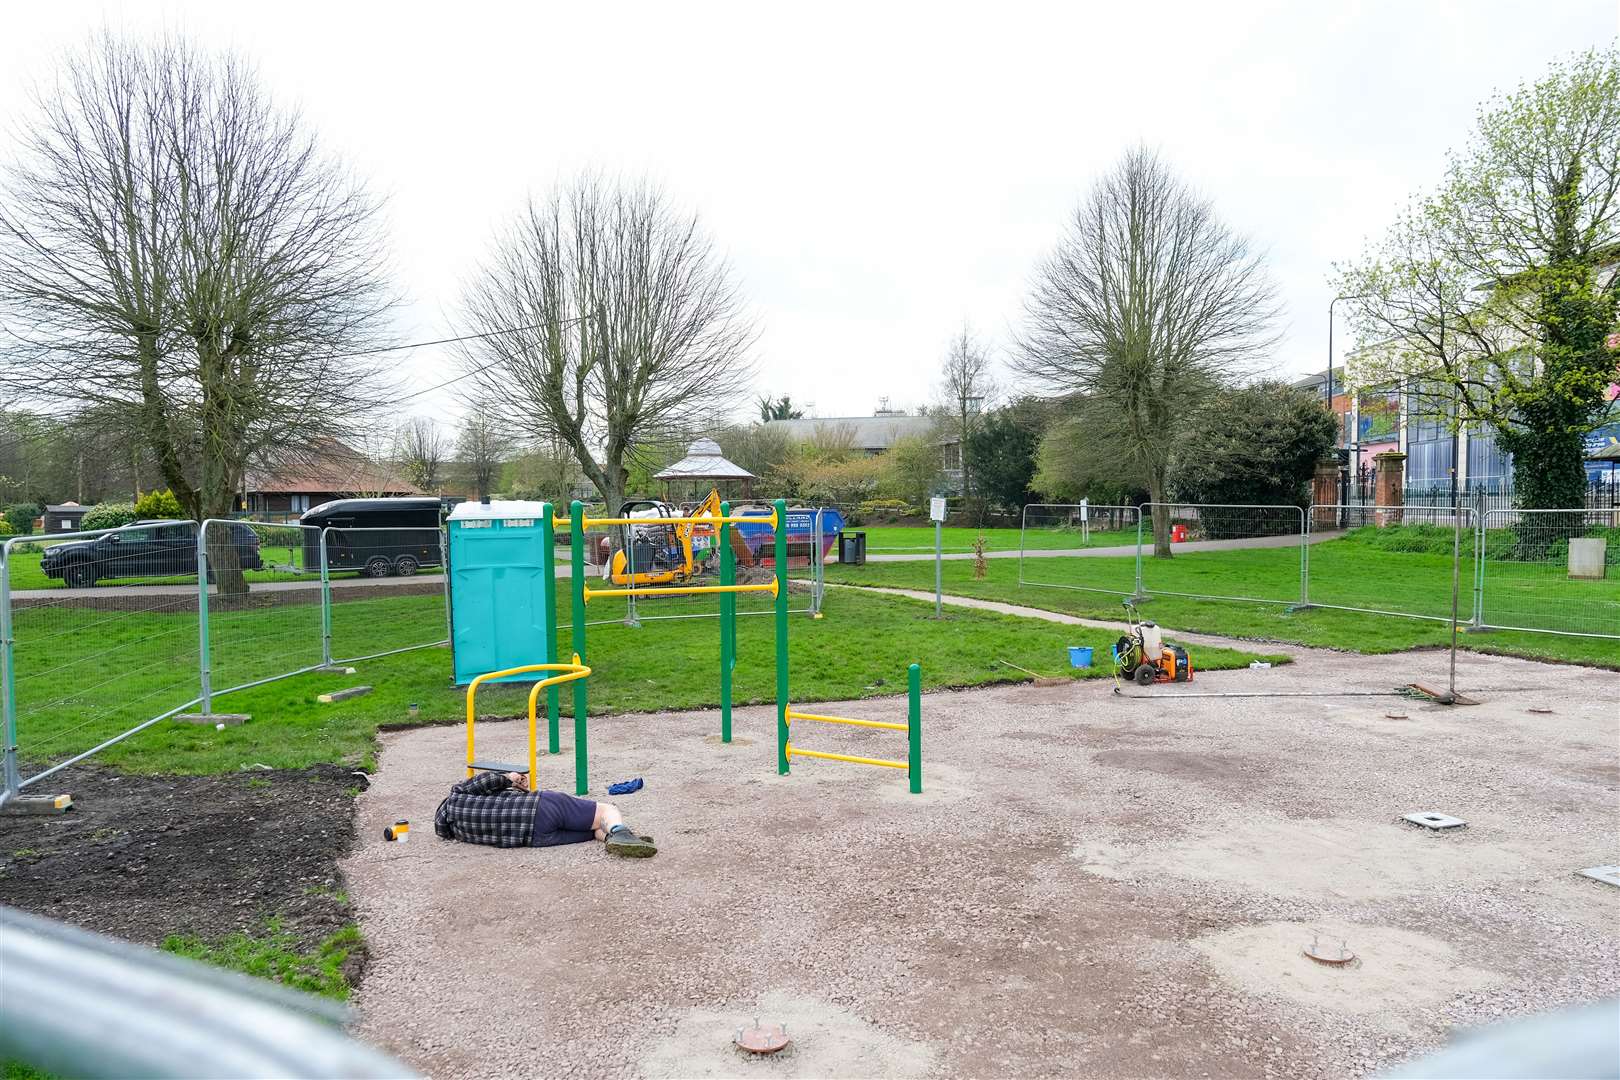 Work has starting on the new outdoor gym in Victoria Park